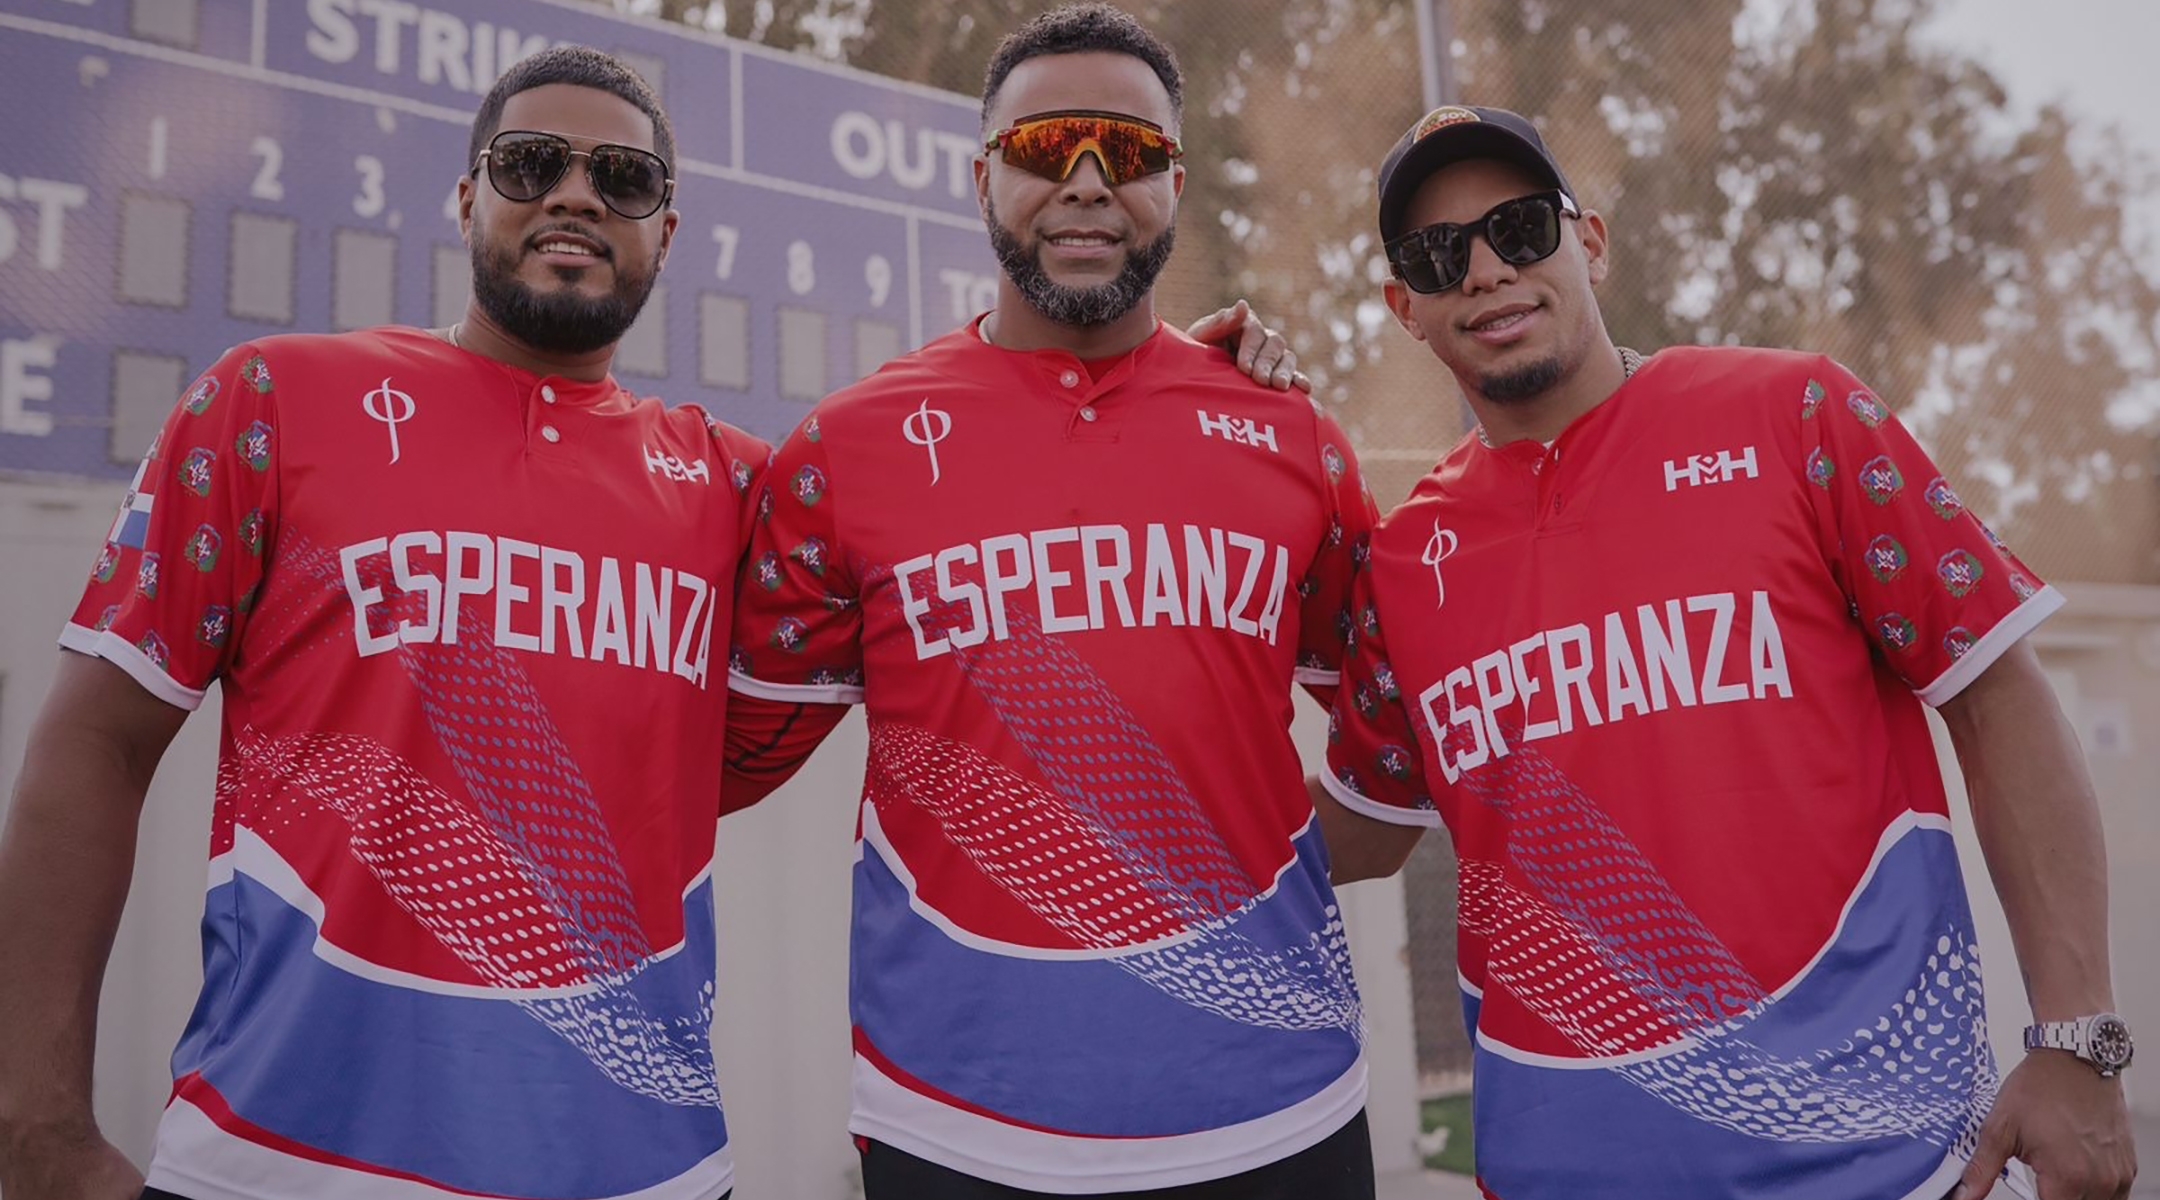 From left, Jeimer Candelario, Nelson Cruz and Cesar Hernandez pose for a photo at a baseball field in Raanana, Israel. (Nico Andre’ Duran)